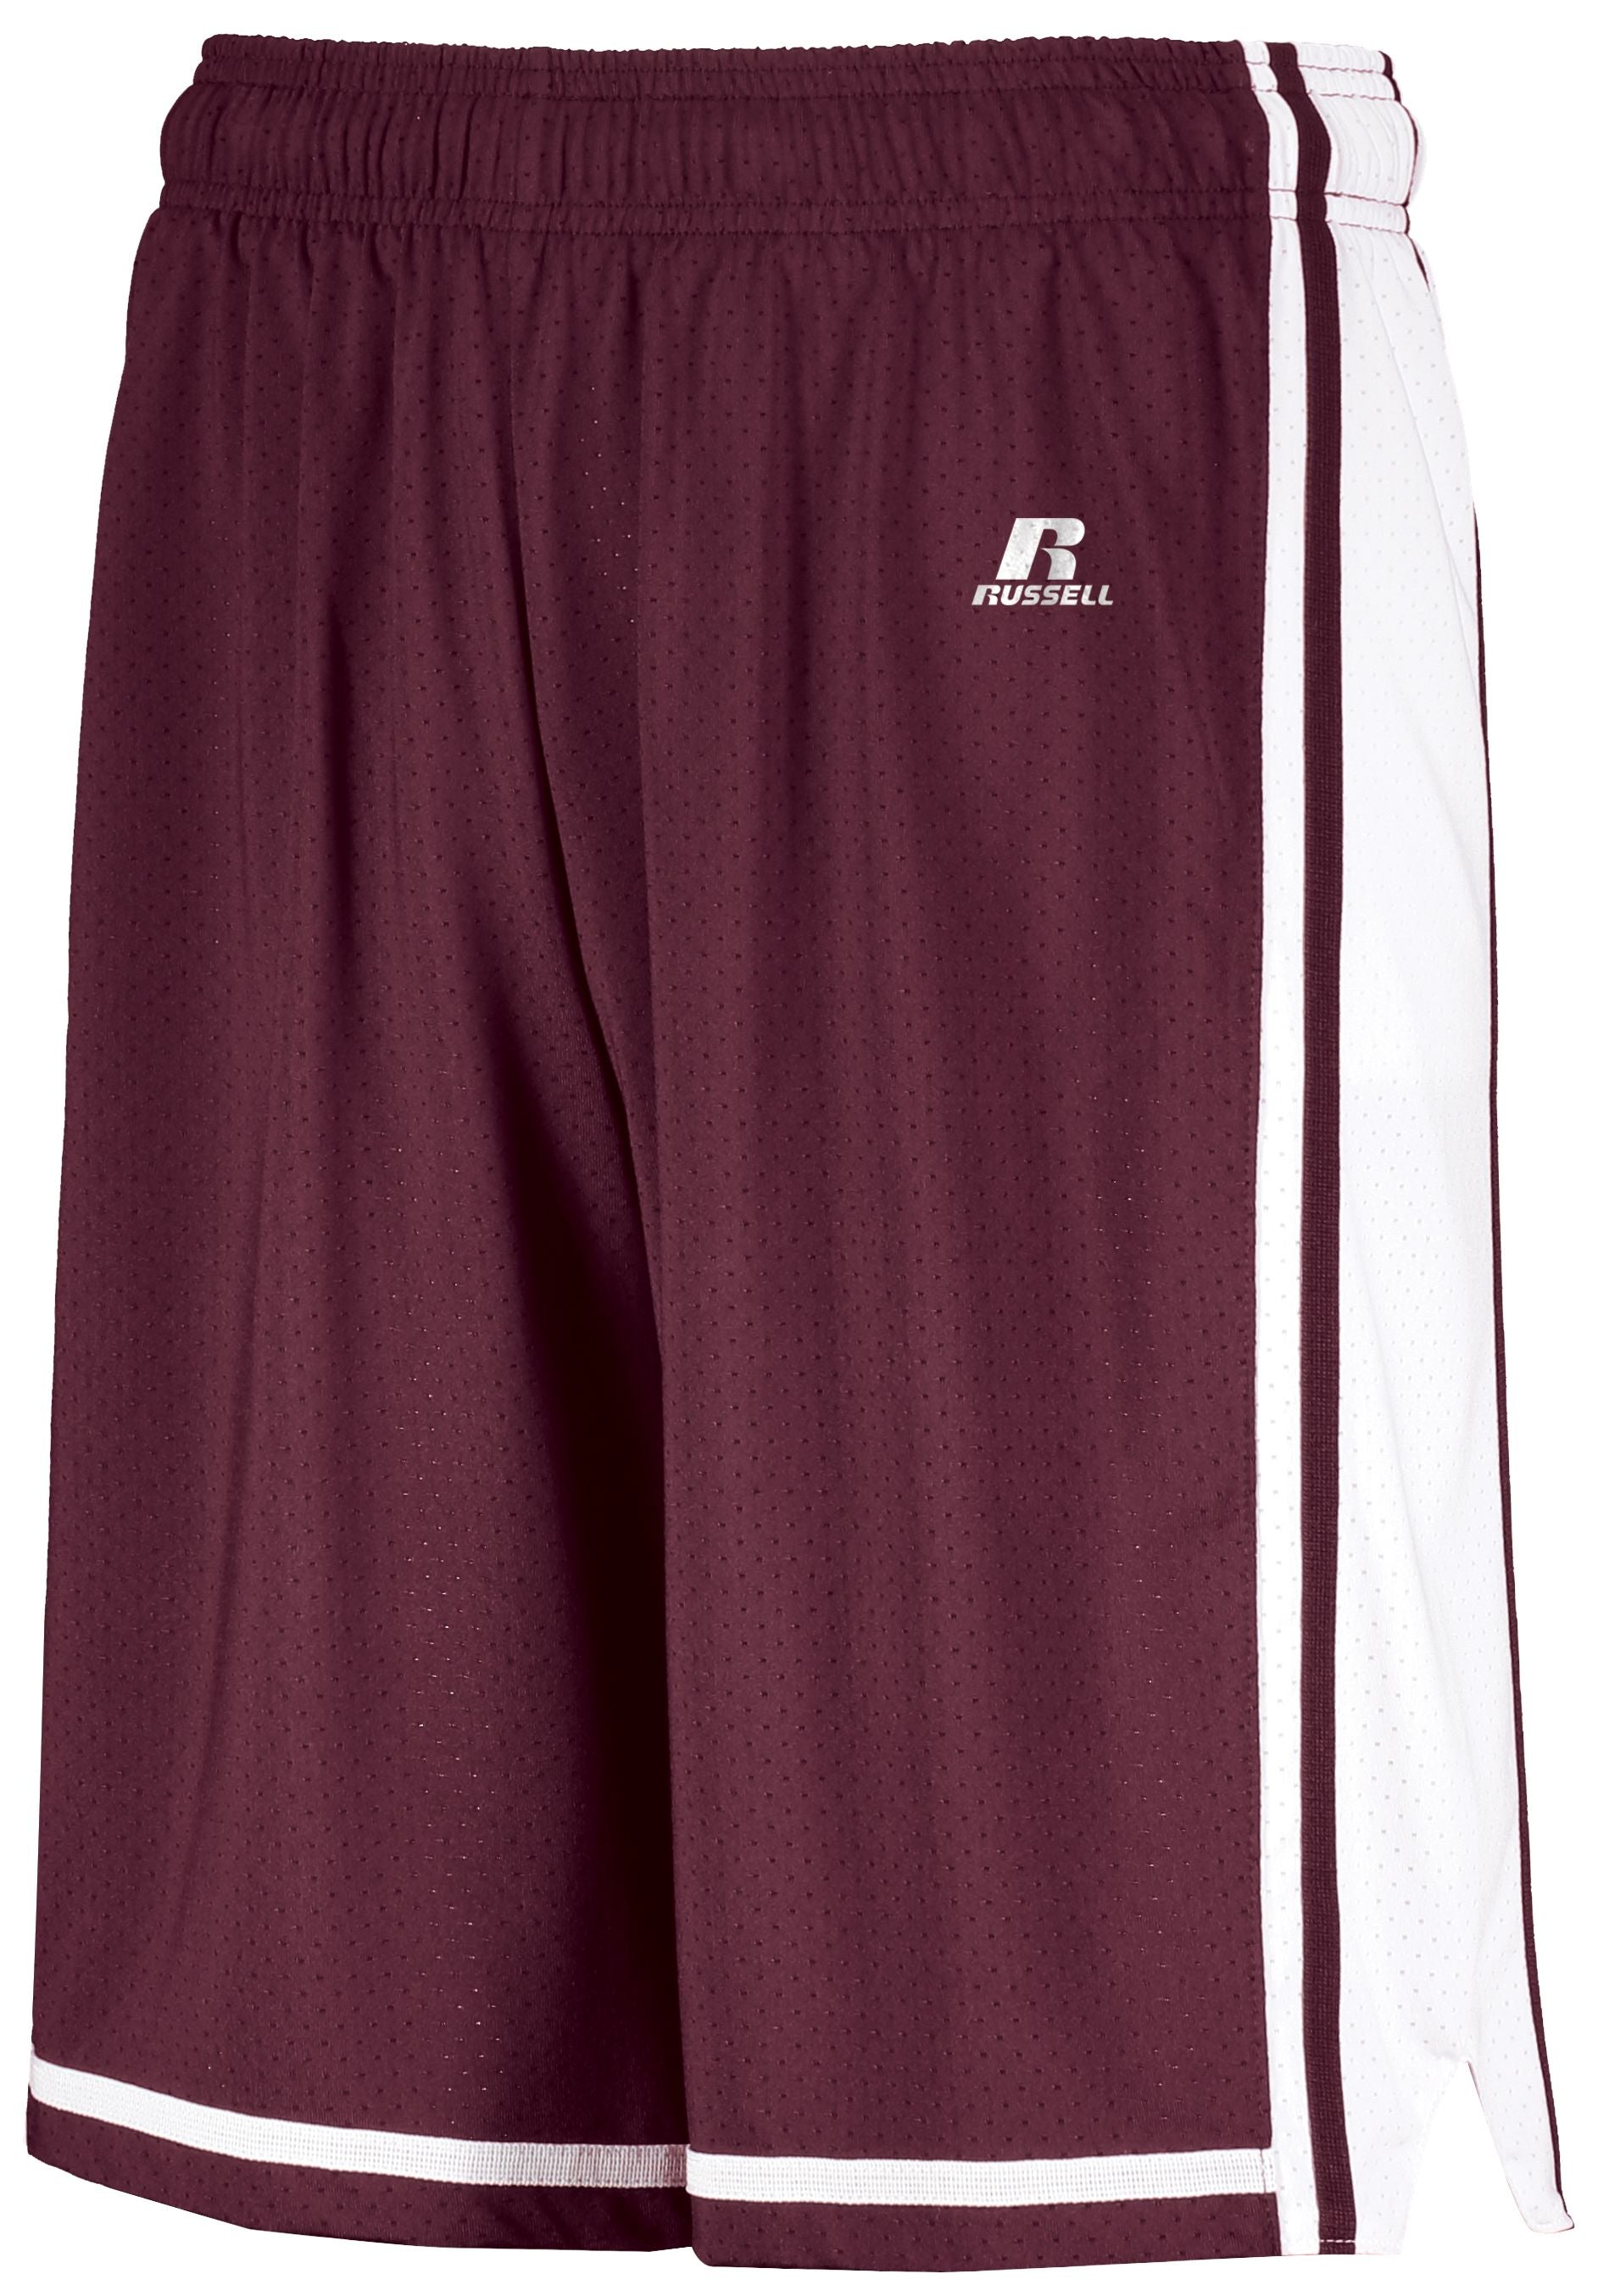 Russell Athletic Legacy Basketball Shorts in Maroon/White  -Part of the Adult, Adult-Shorts, Basketball, Russell-Athletic-Products, All-Sports, All-Sports-1 product lines at KanaleyCreations.com